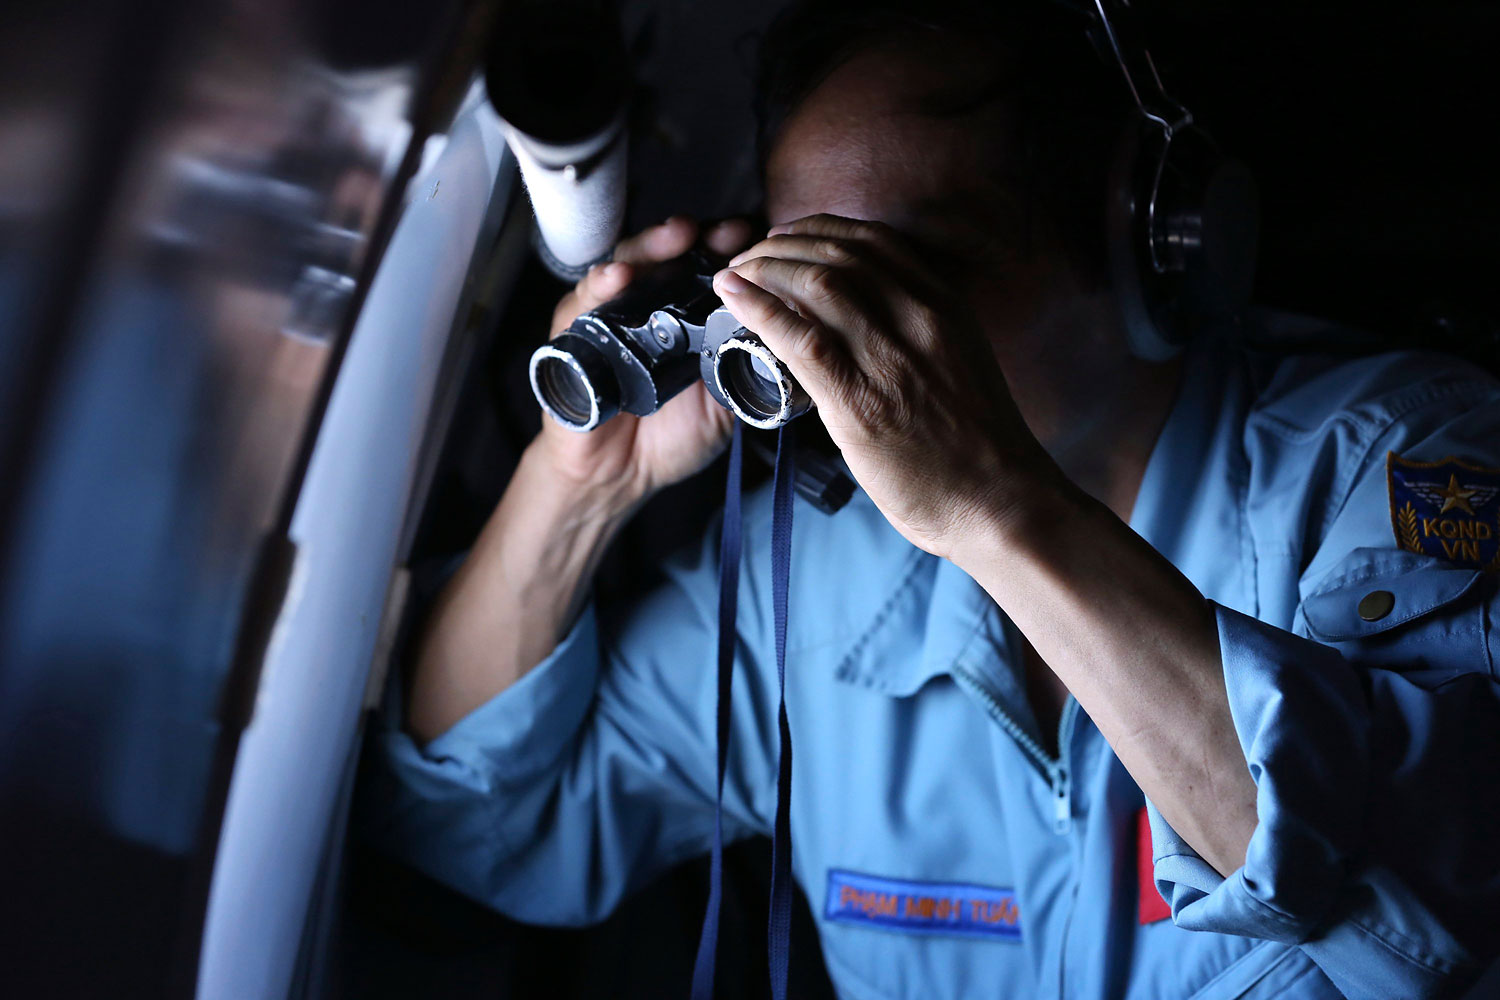 Vietnamese Air Force Col. Pham Minh Tuan uses binoculars on board an aircraft during a mission to search for the missing Malaysia Airlines Flight 370 in the Gulf of Thailand, on March 13, 2014. (AP)